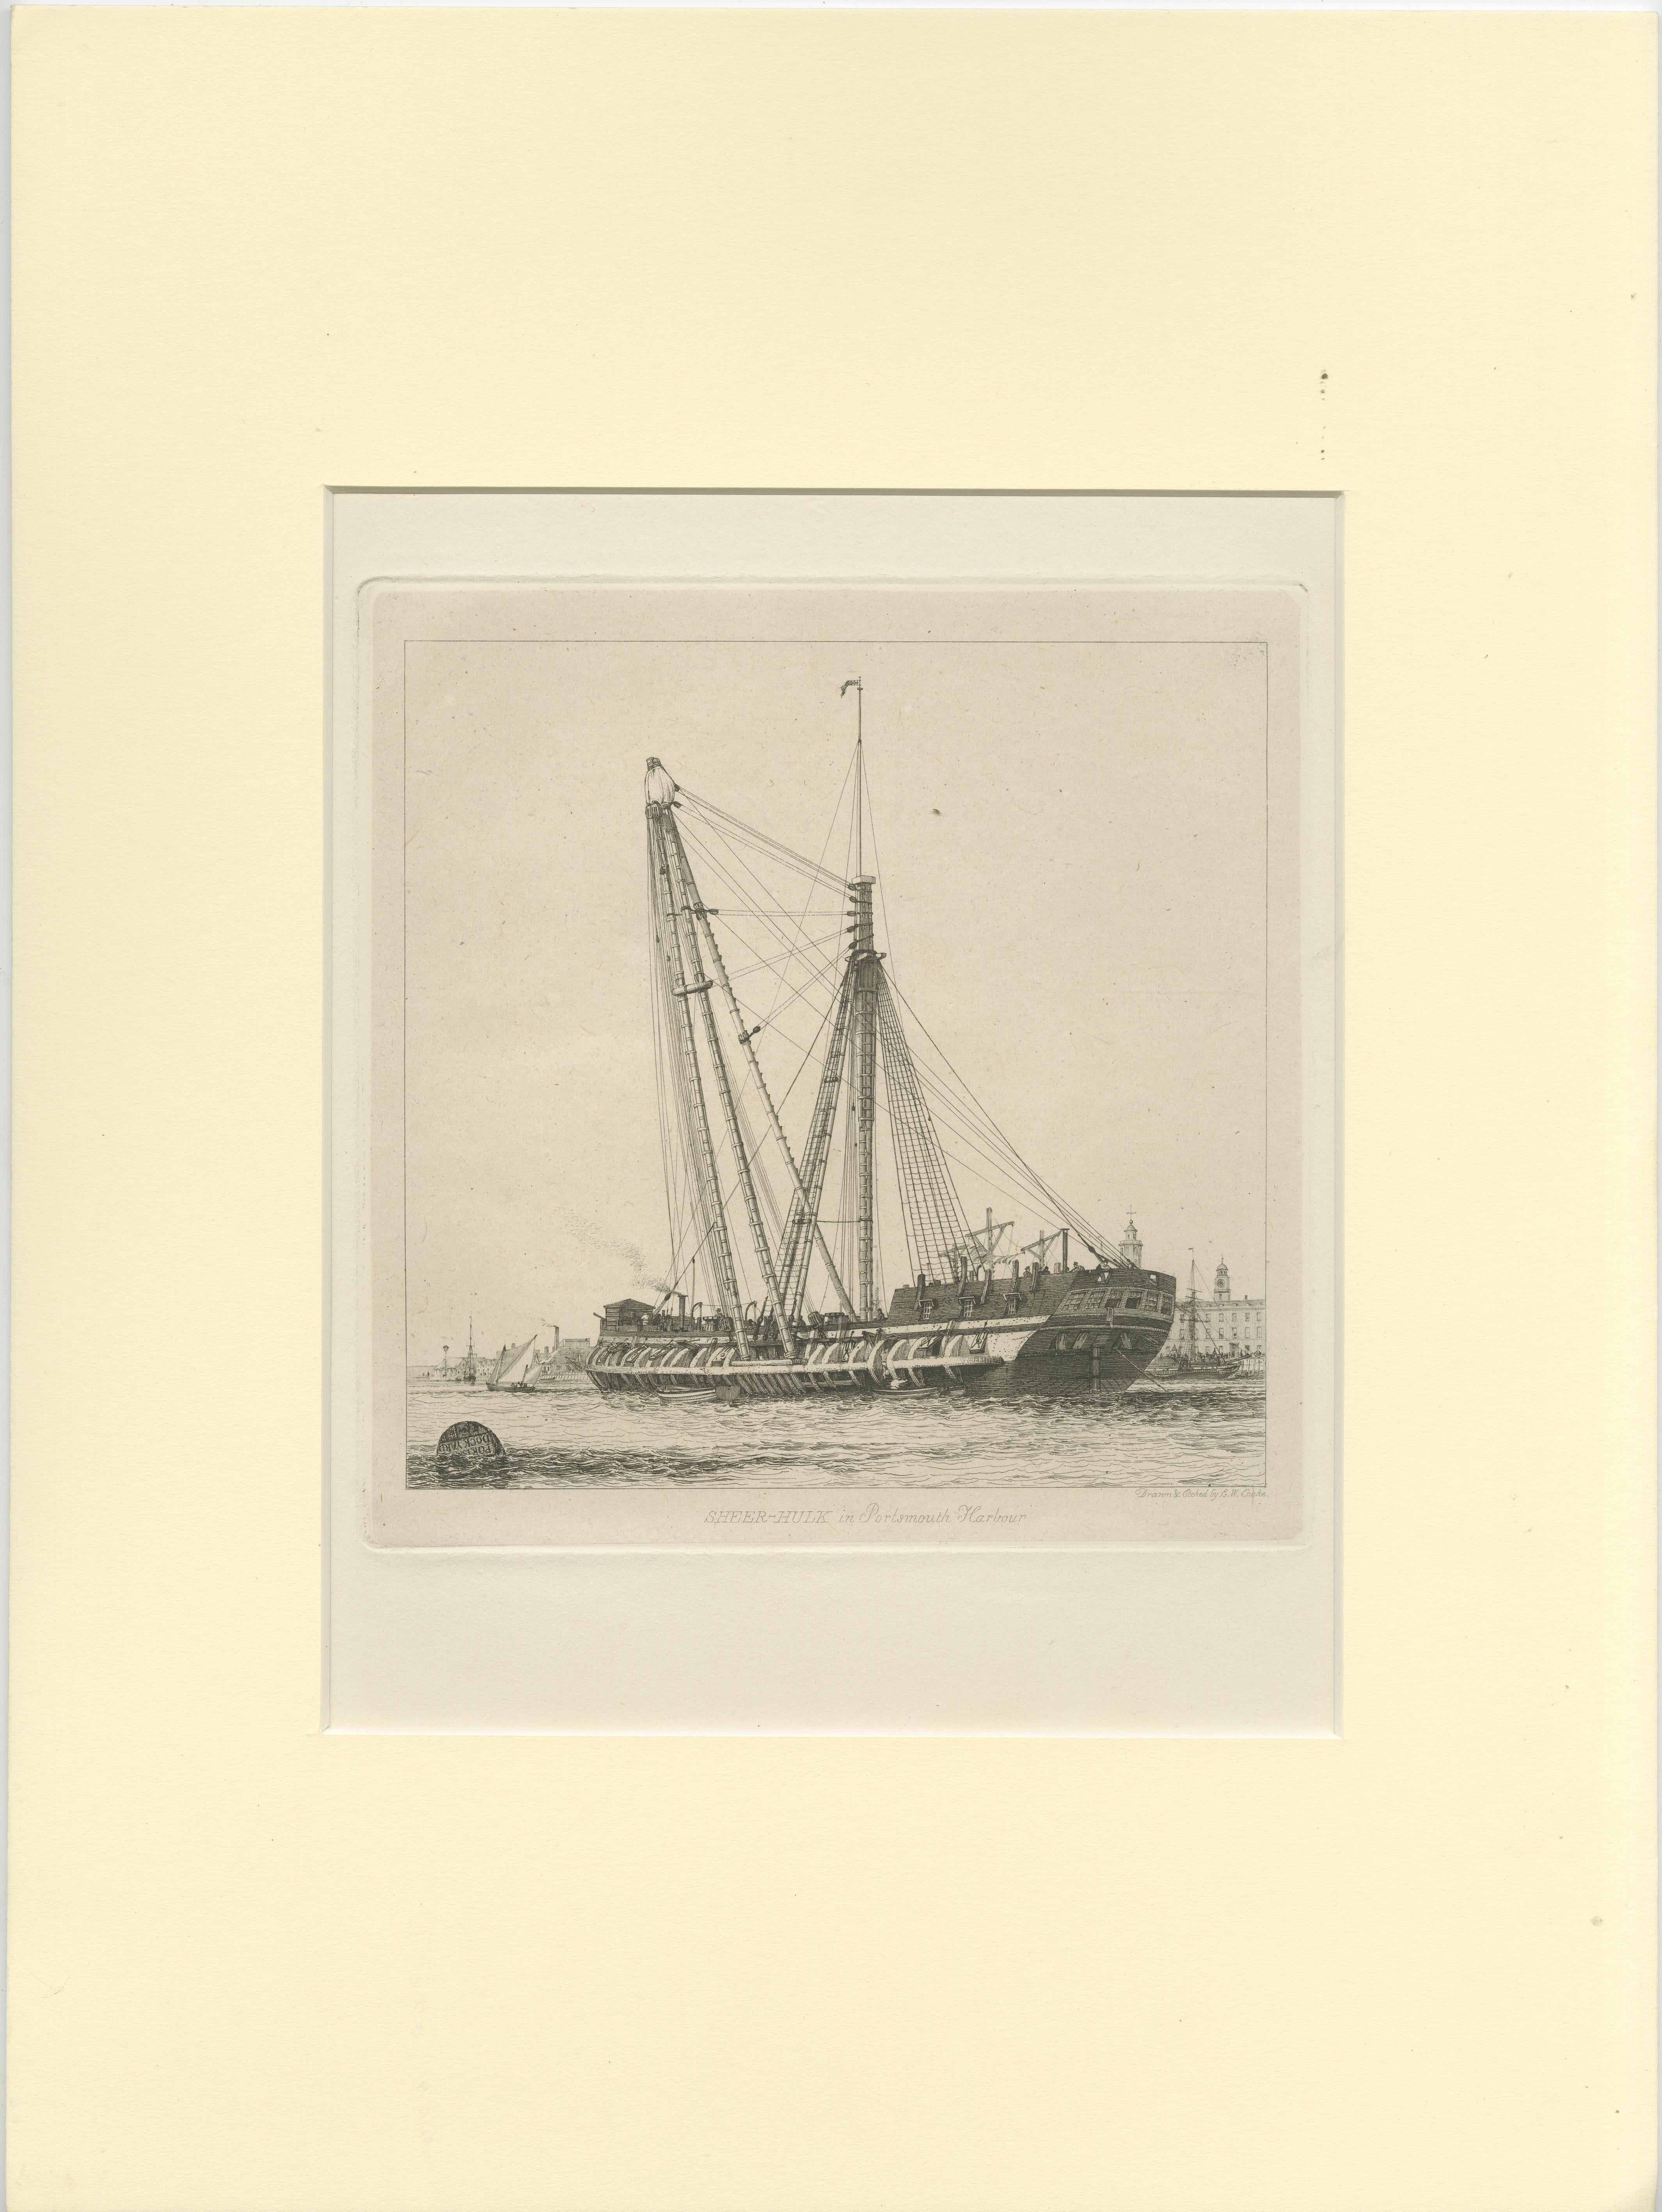 Antique print titled 'Sheer-Hulk in Portsmouth Harbour'. A fine etching by Edward William Cooke showing a sheer hulk (or shear hulk). It was used in shipbuilding and repair as a floating crane. This print originates from 'Fifty Plates of Shipping